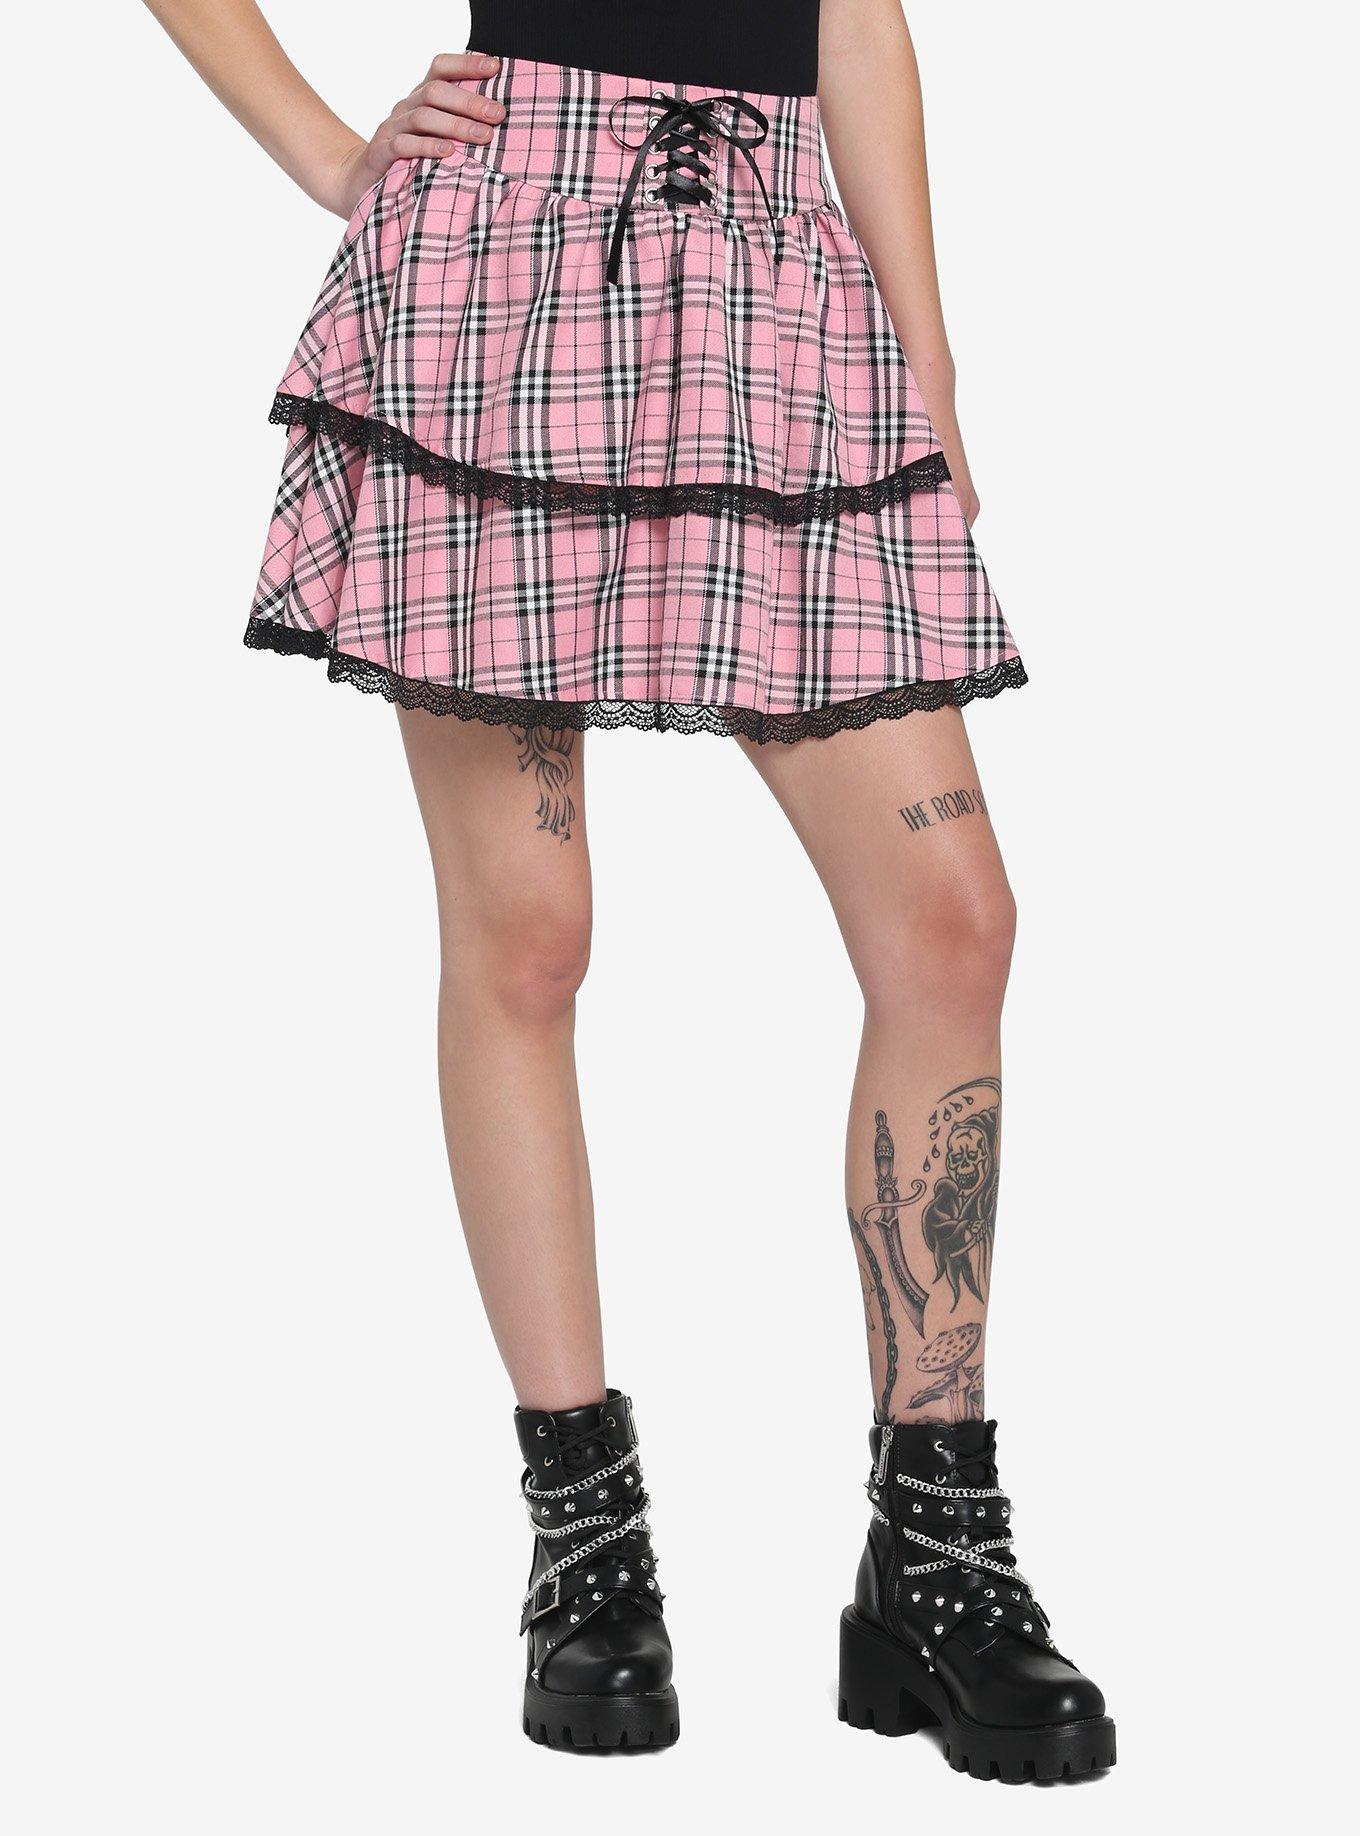 Pink Plaid Lace-Up Tiered Skirt, PLAID - PINK, hi-res